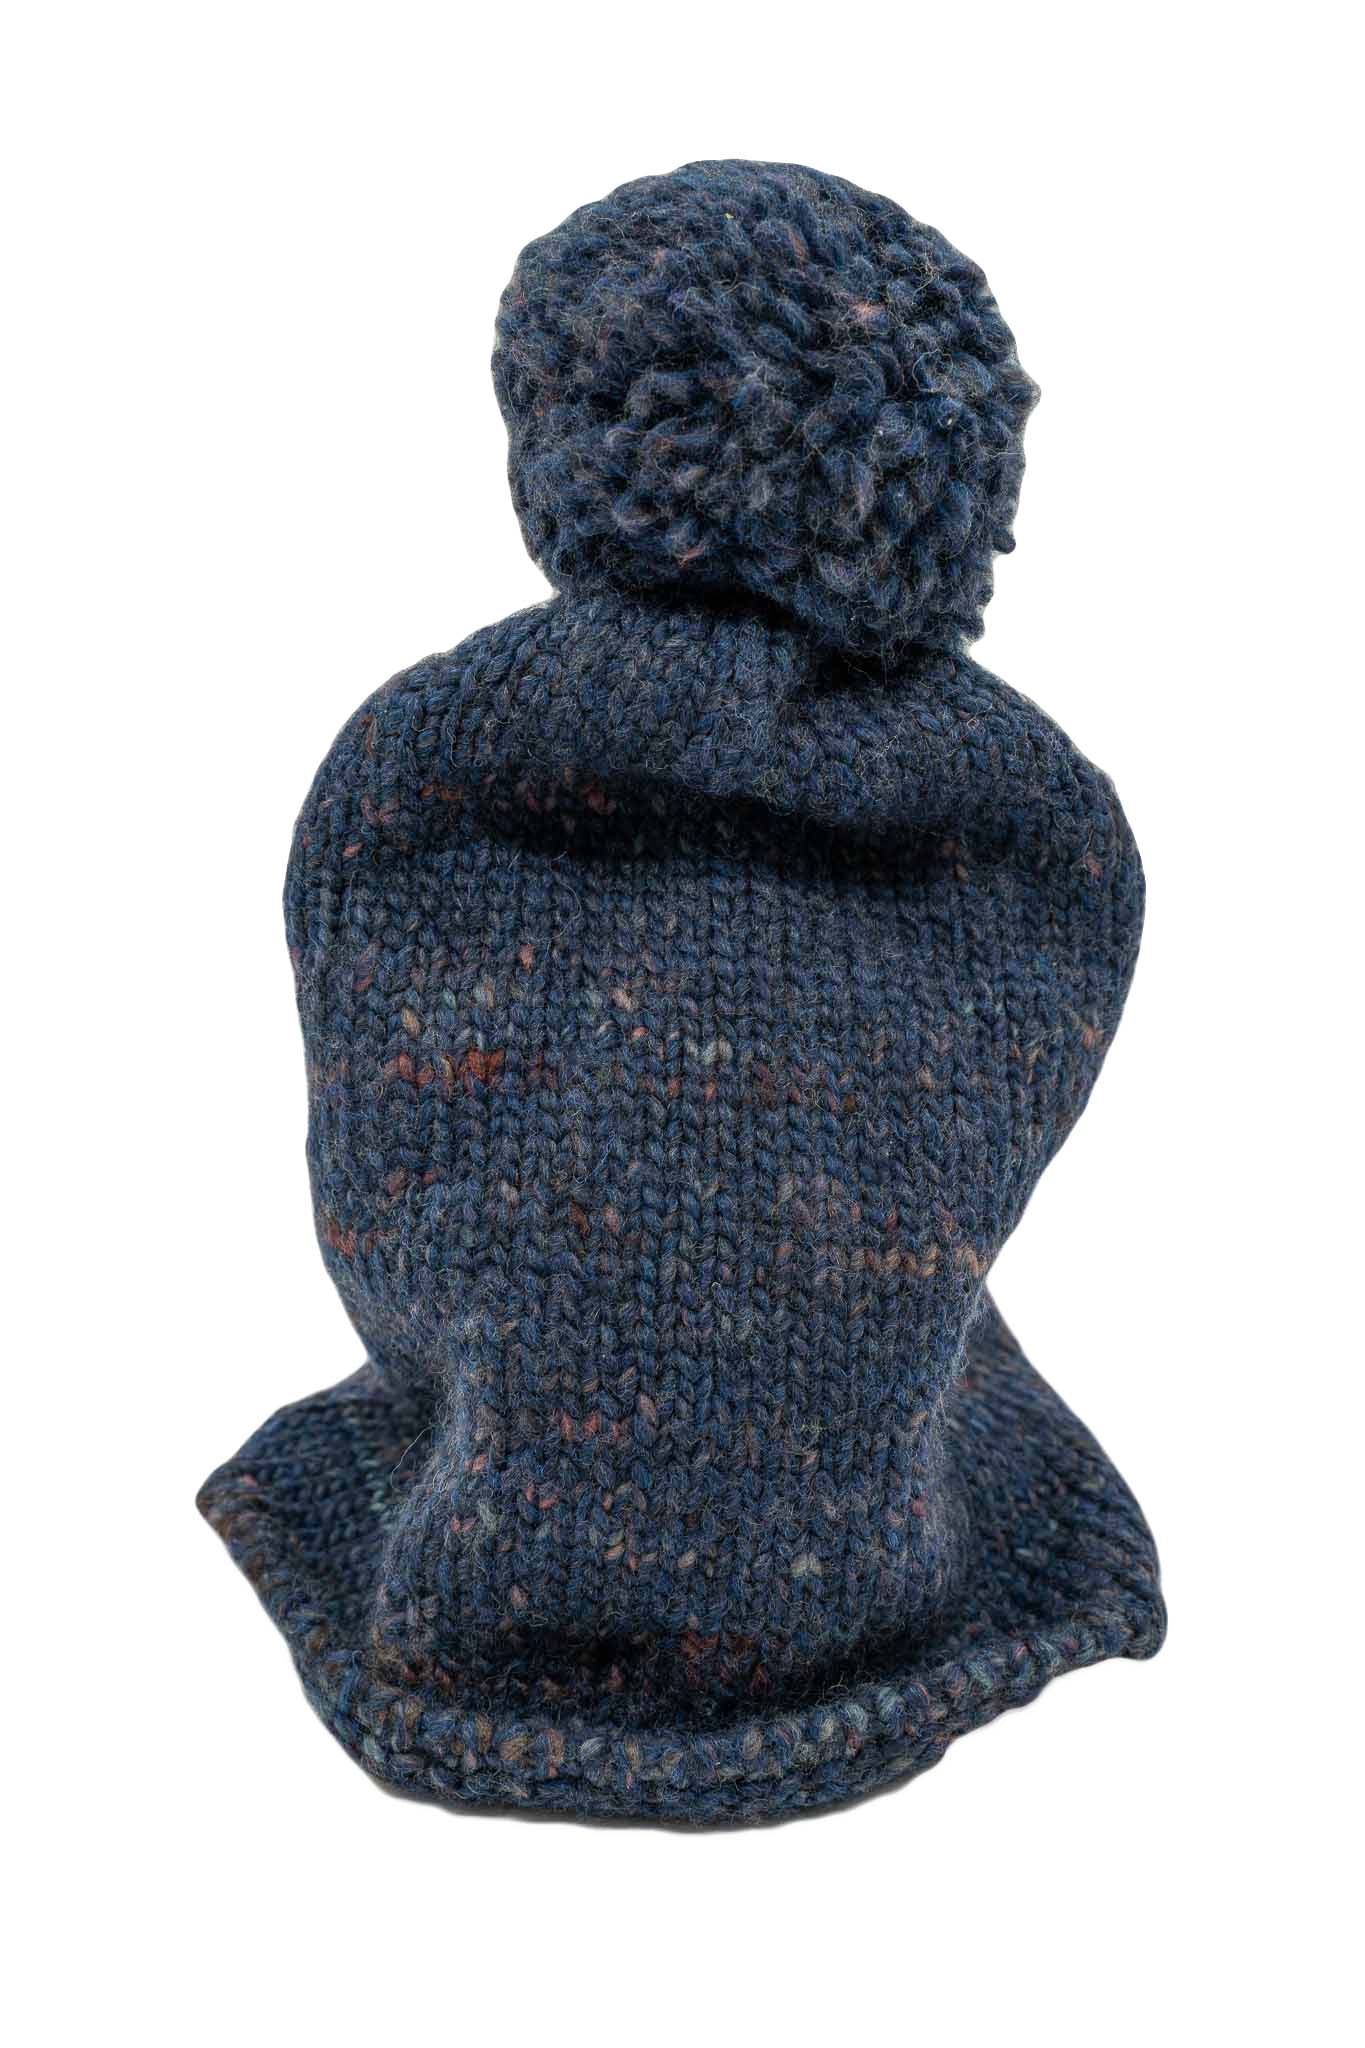 Speckled beanie